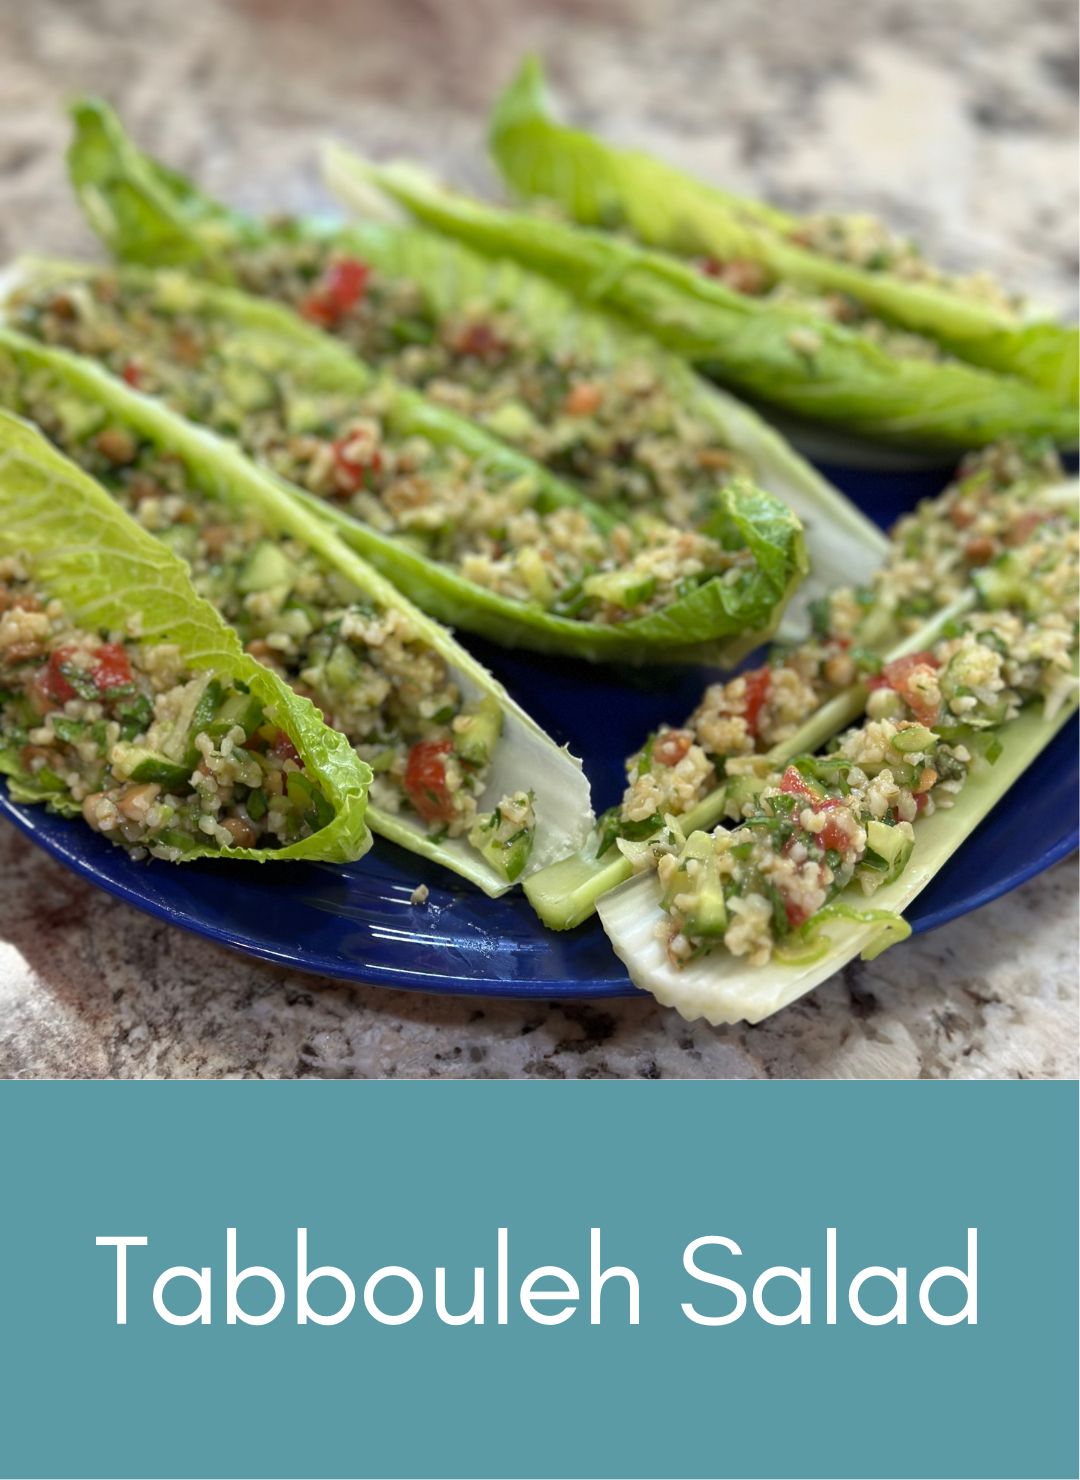 Whole food classic tabbouleh salad Picture with link to recipe